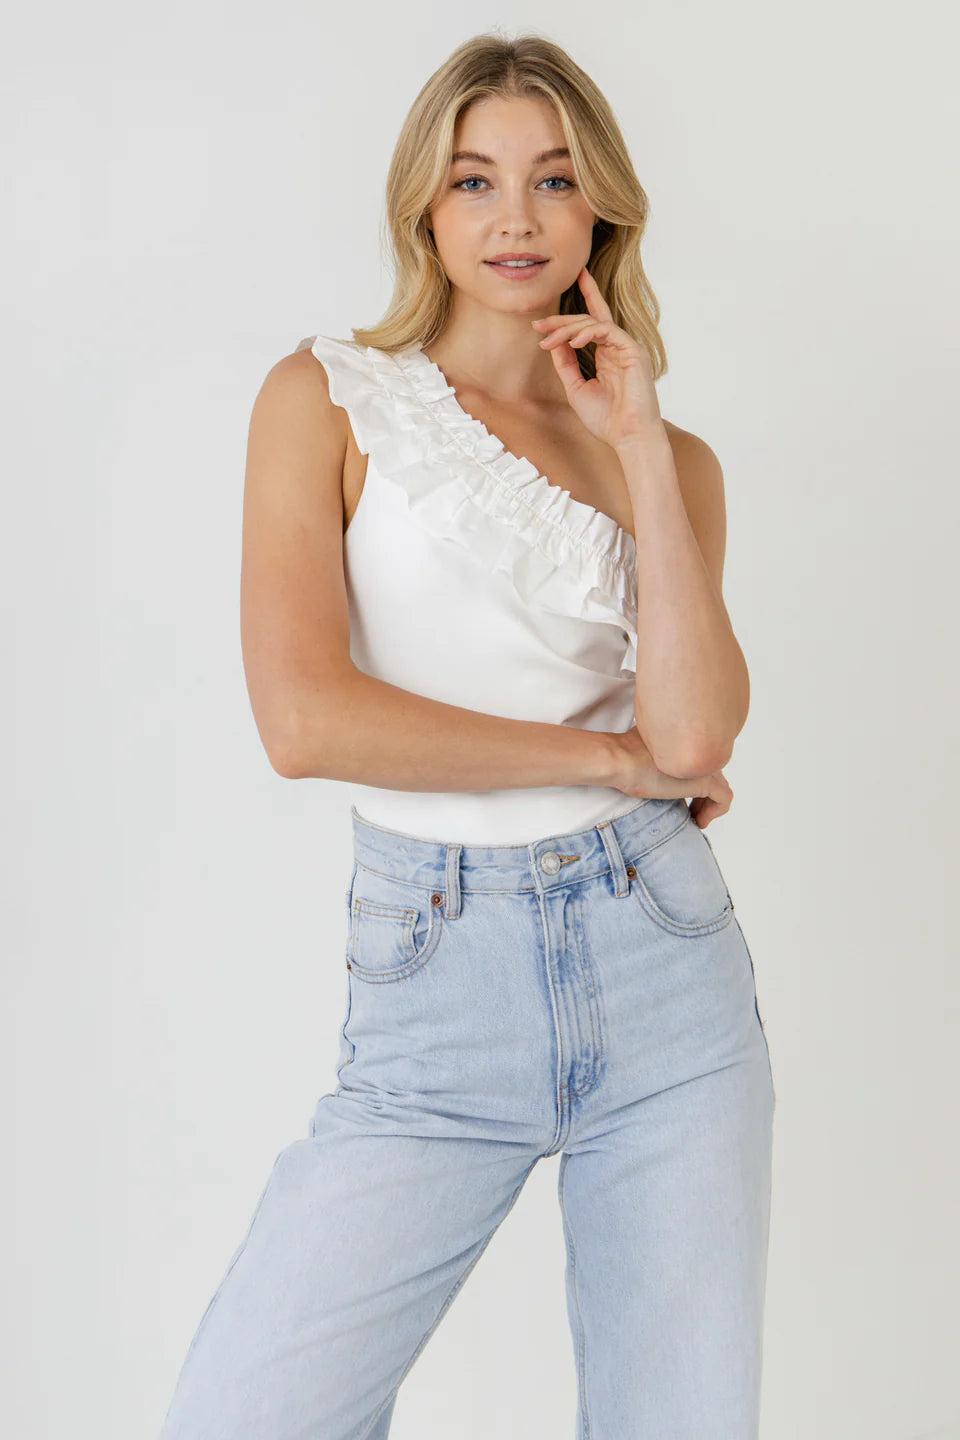 Zoom picture of a blonde model using the Endless Rose White Ruffle Bodysuit and Jeans - CT Grace